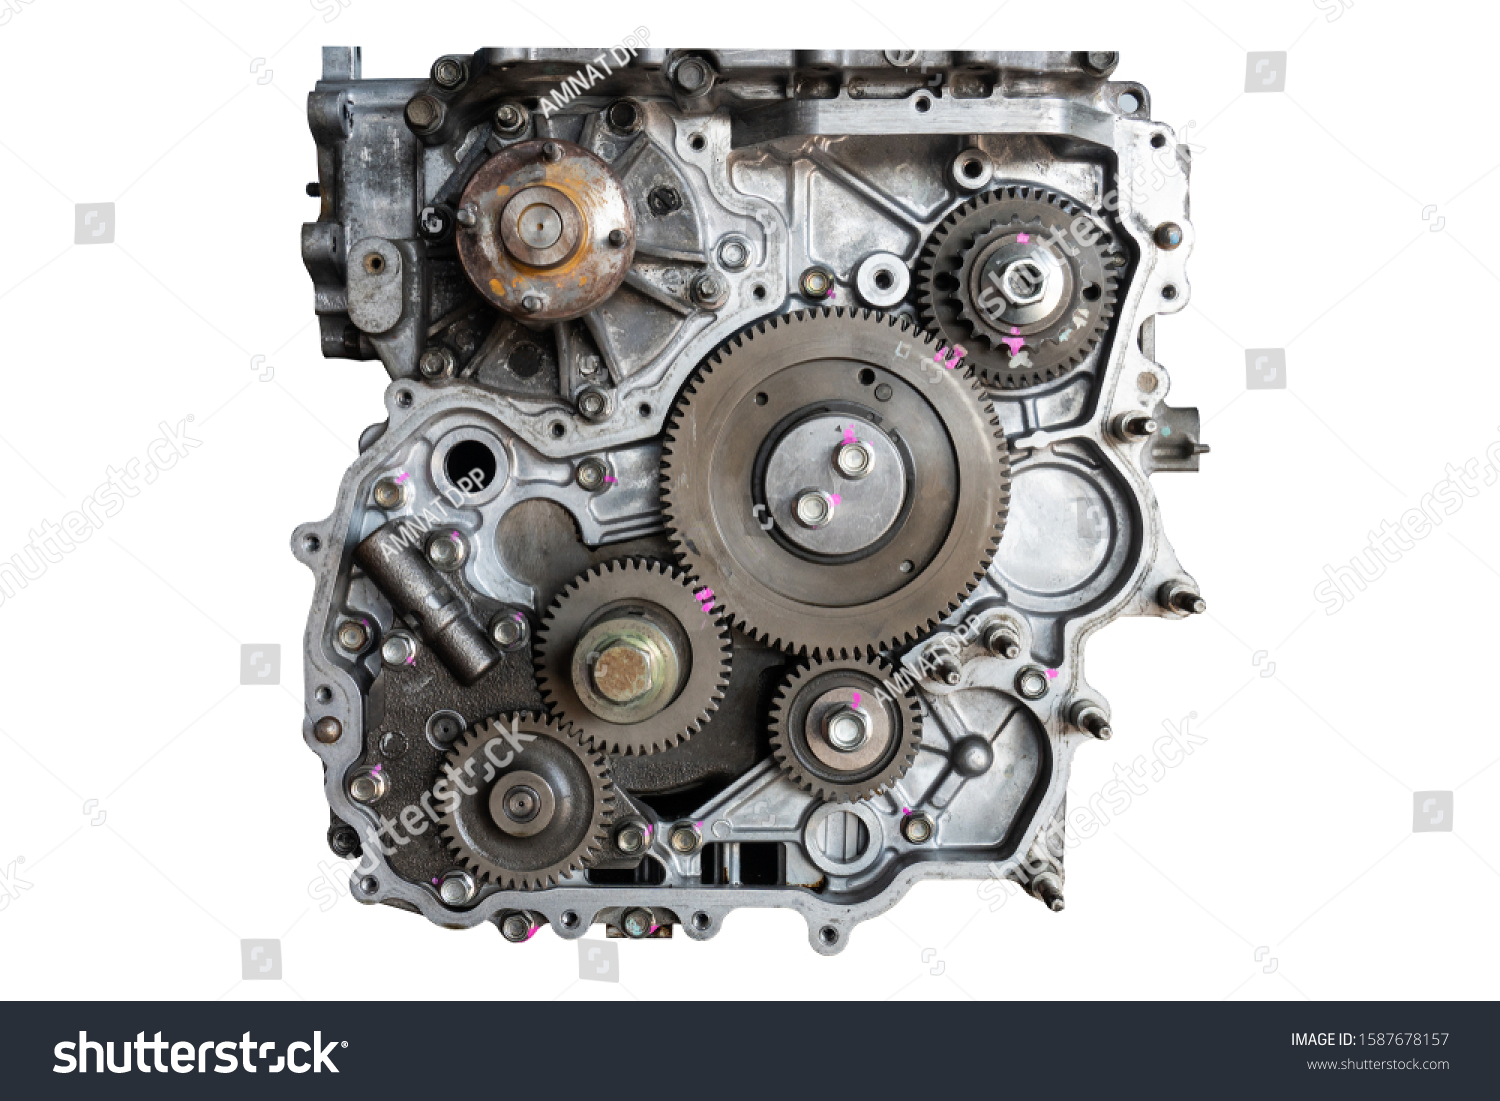 Car engine in the garage for maintenance. Repair service , on white background #1587678157